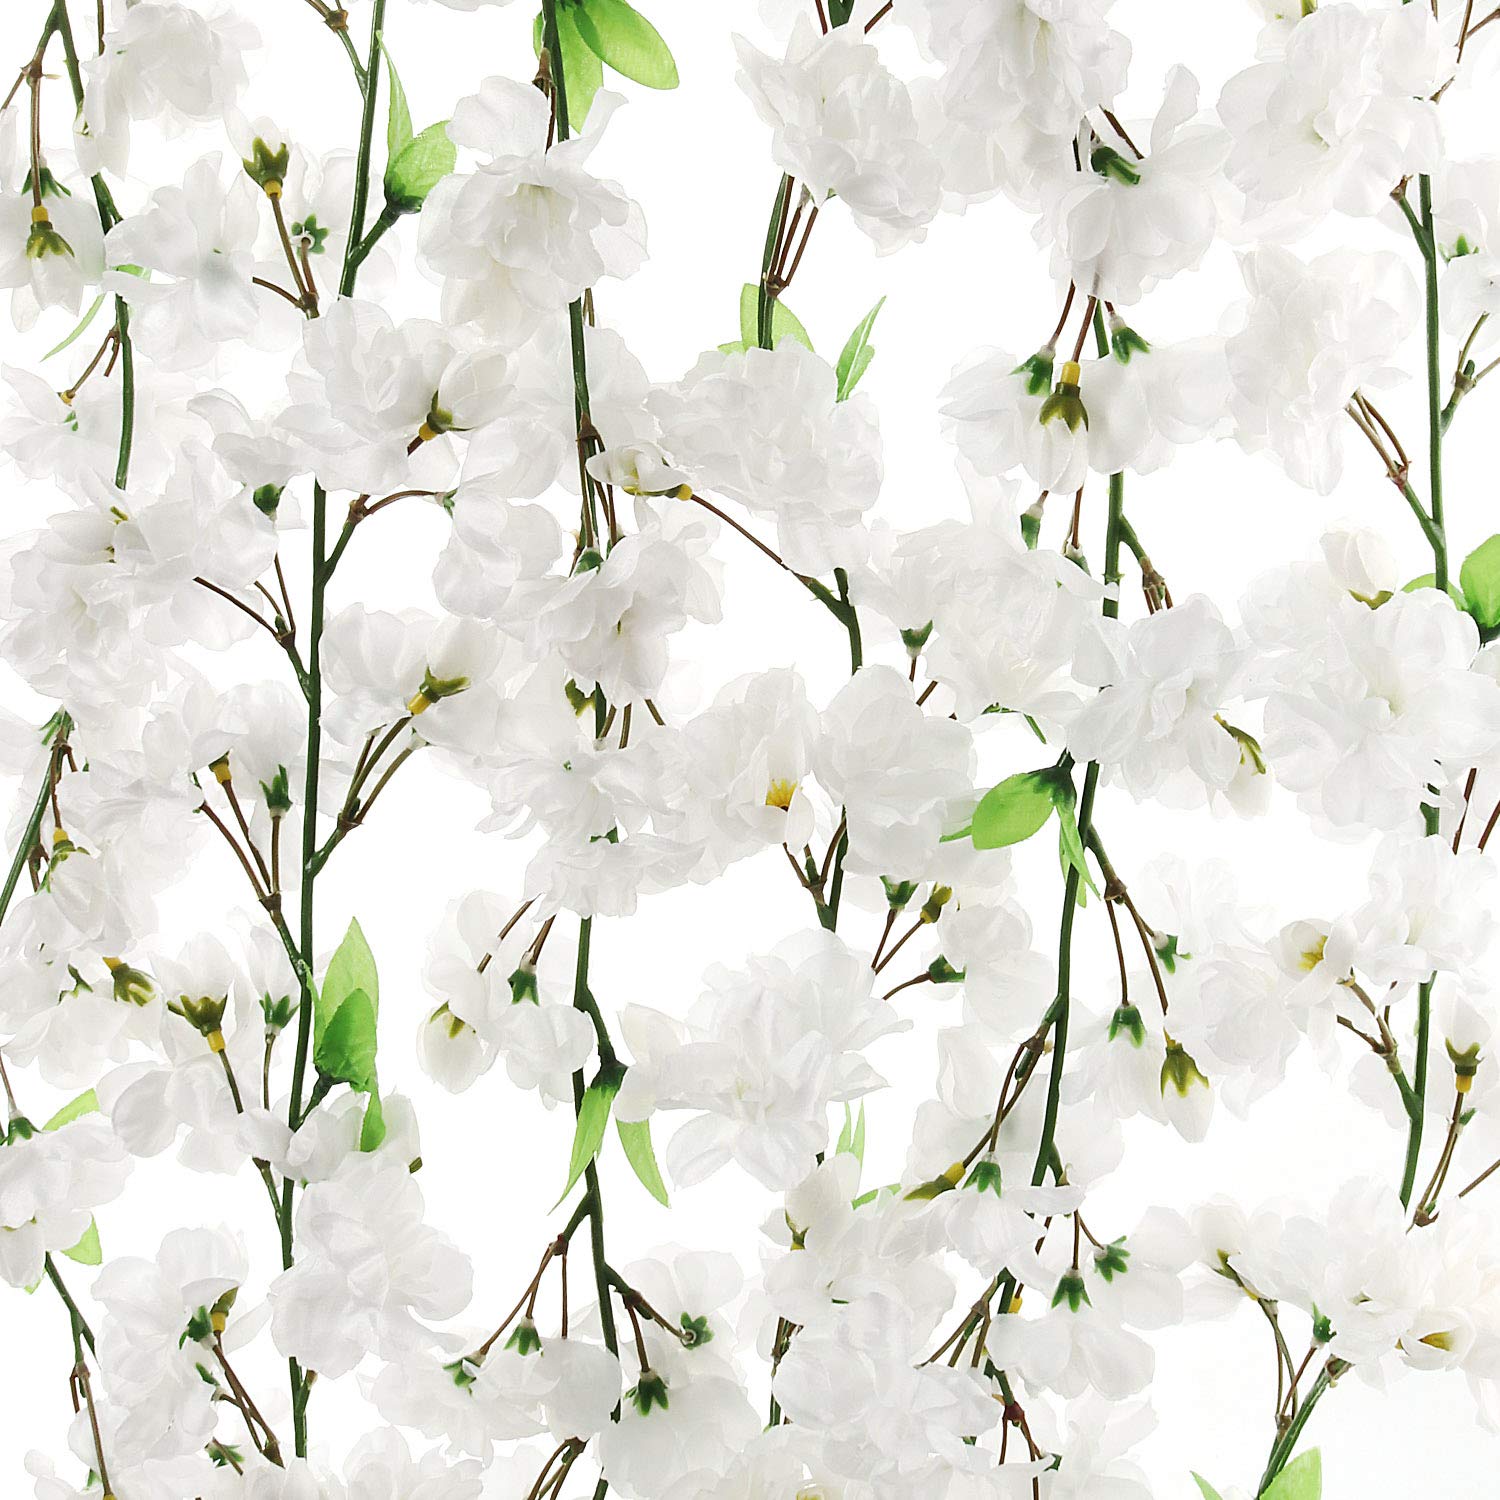 White 4.5' Cherry Blossom Garland - Premium Faux Floral Decor for Elegant Home and Event Settings; Realistic Blossom Design for Weddings, Festivals, and Mantel Embellishments